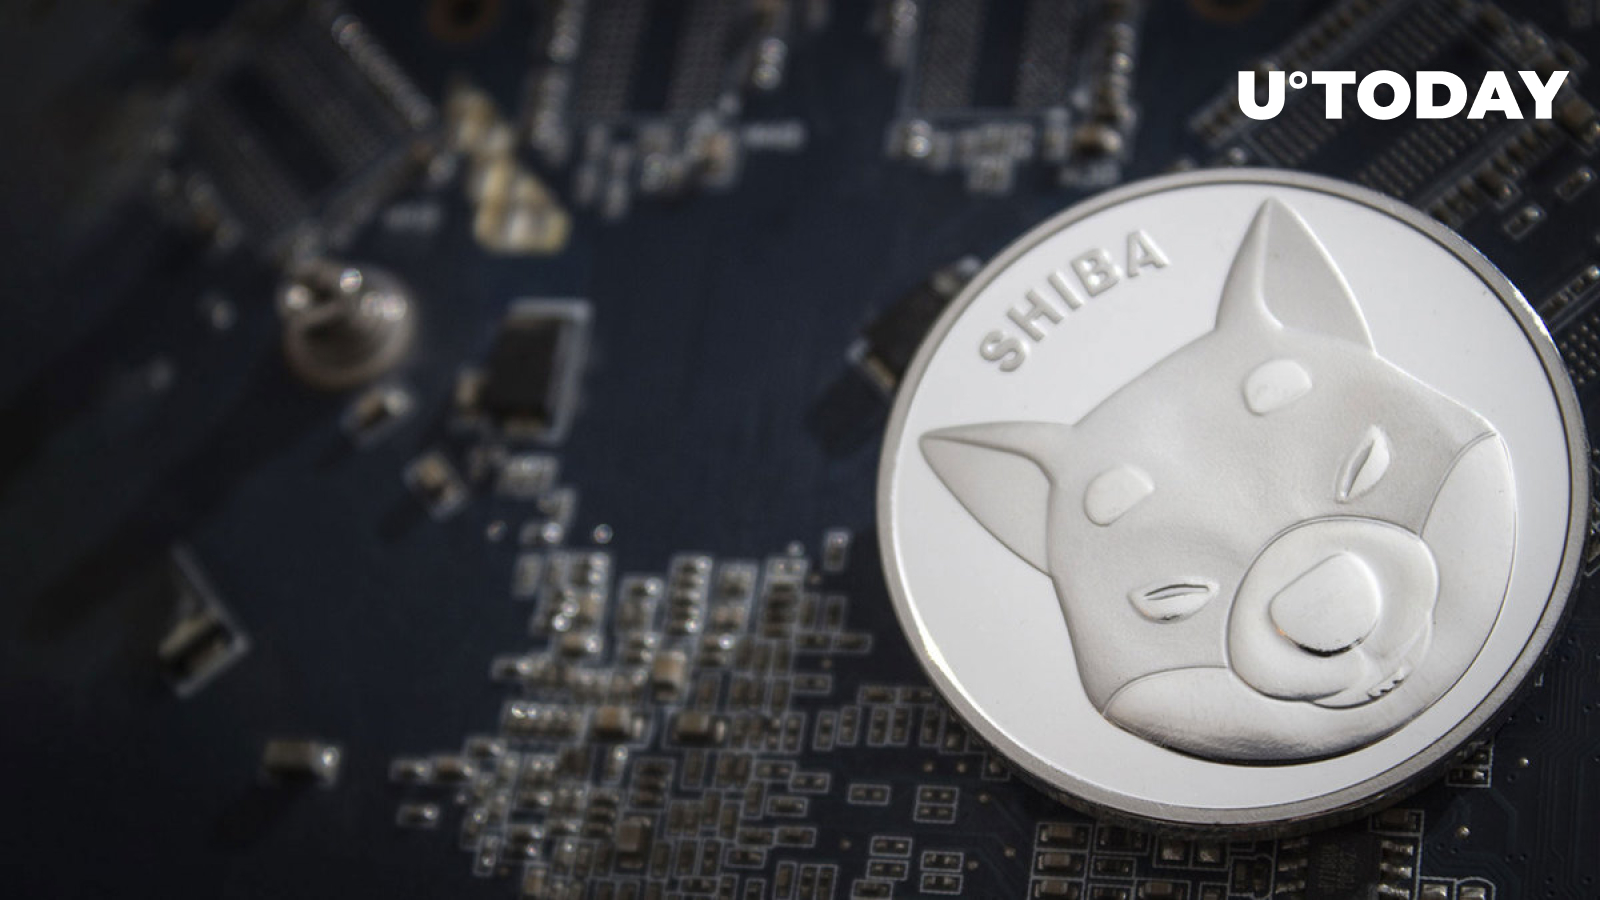 Shiba Inu (SHIB) ‘Calm Before Storm’ Updates Revealed by Shiba Ecosystem Official